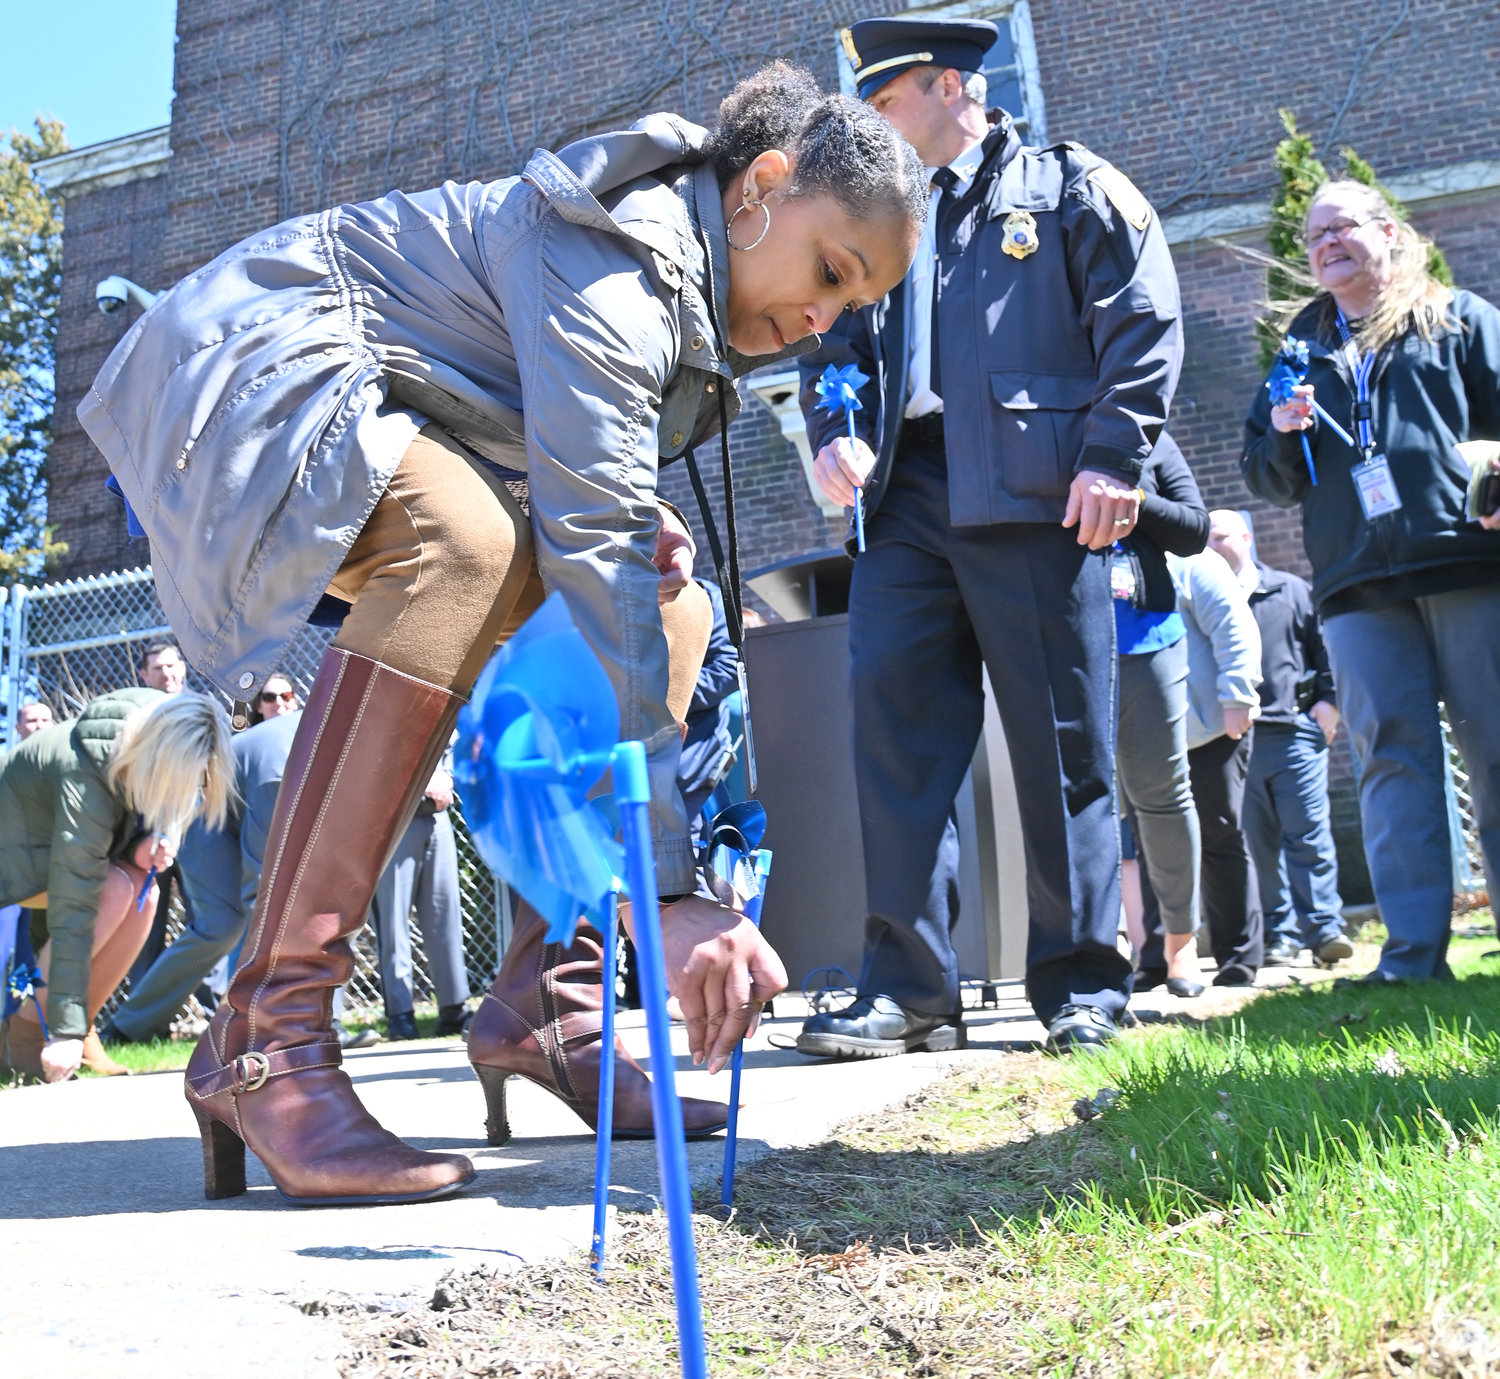 PINWHEELS TO REMEMBER — Krystal Harmon-Burton, an administrative assistant at Oneida County Child Advocacy Center, places a pinwheel into the ground during the ceremony on Thursday marking National Child Abuse Prevention Month. The CAC and local county leaders make this month every year with pinwheels to help spread awareness.